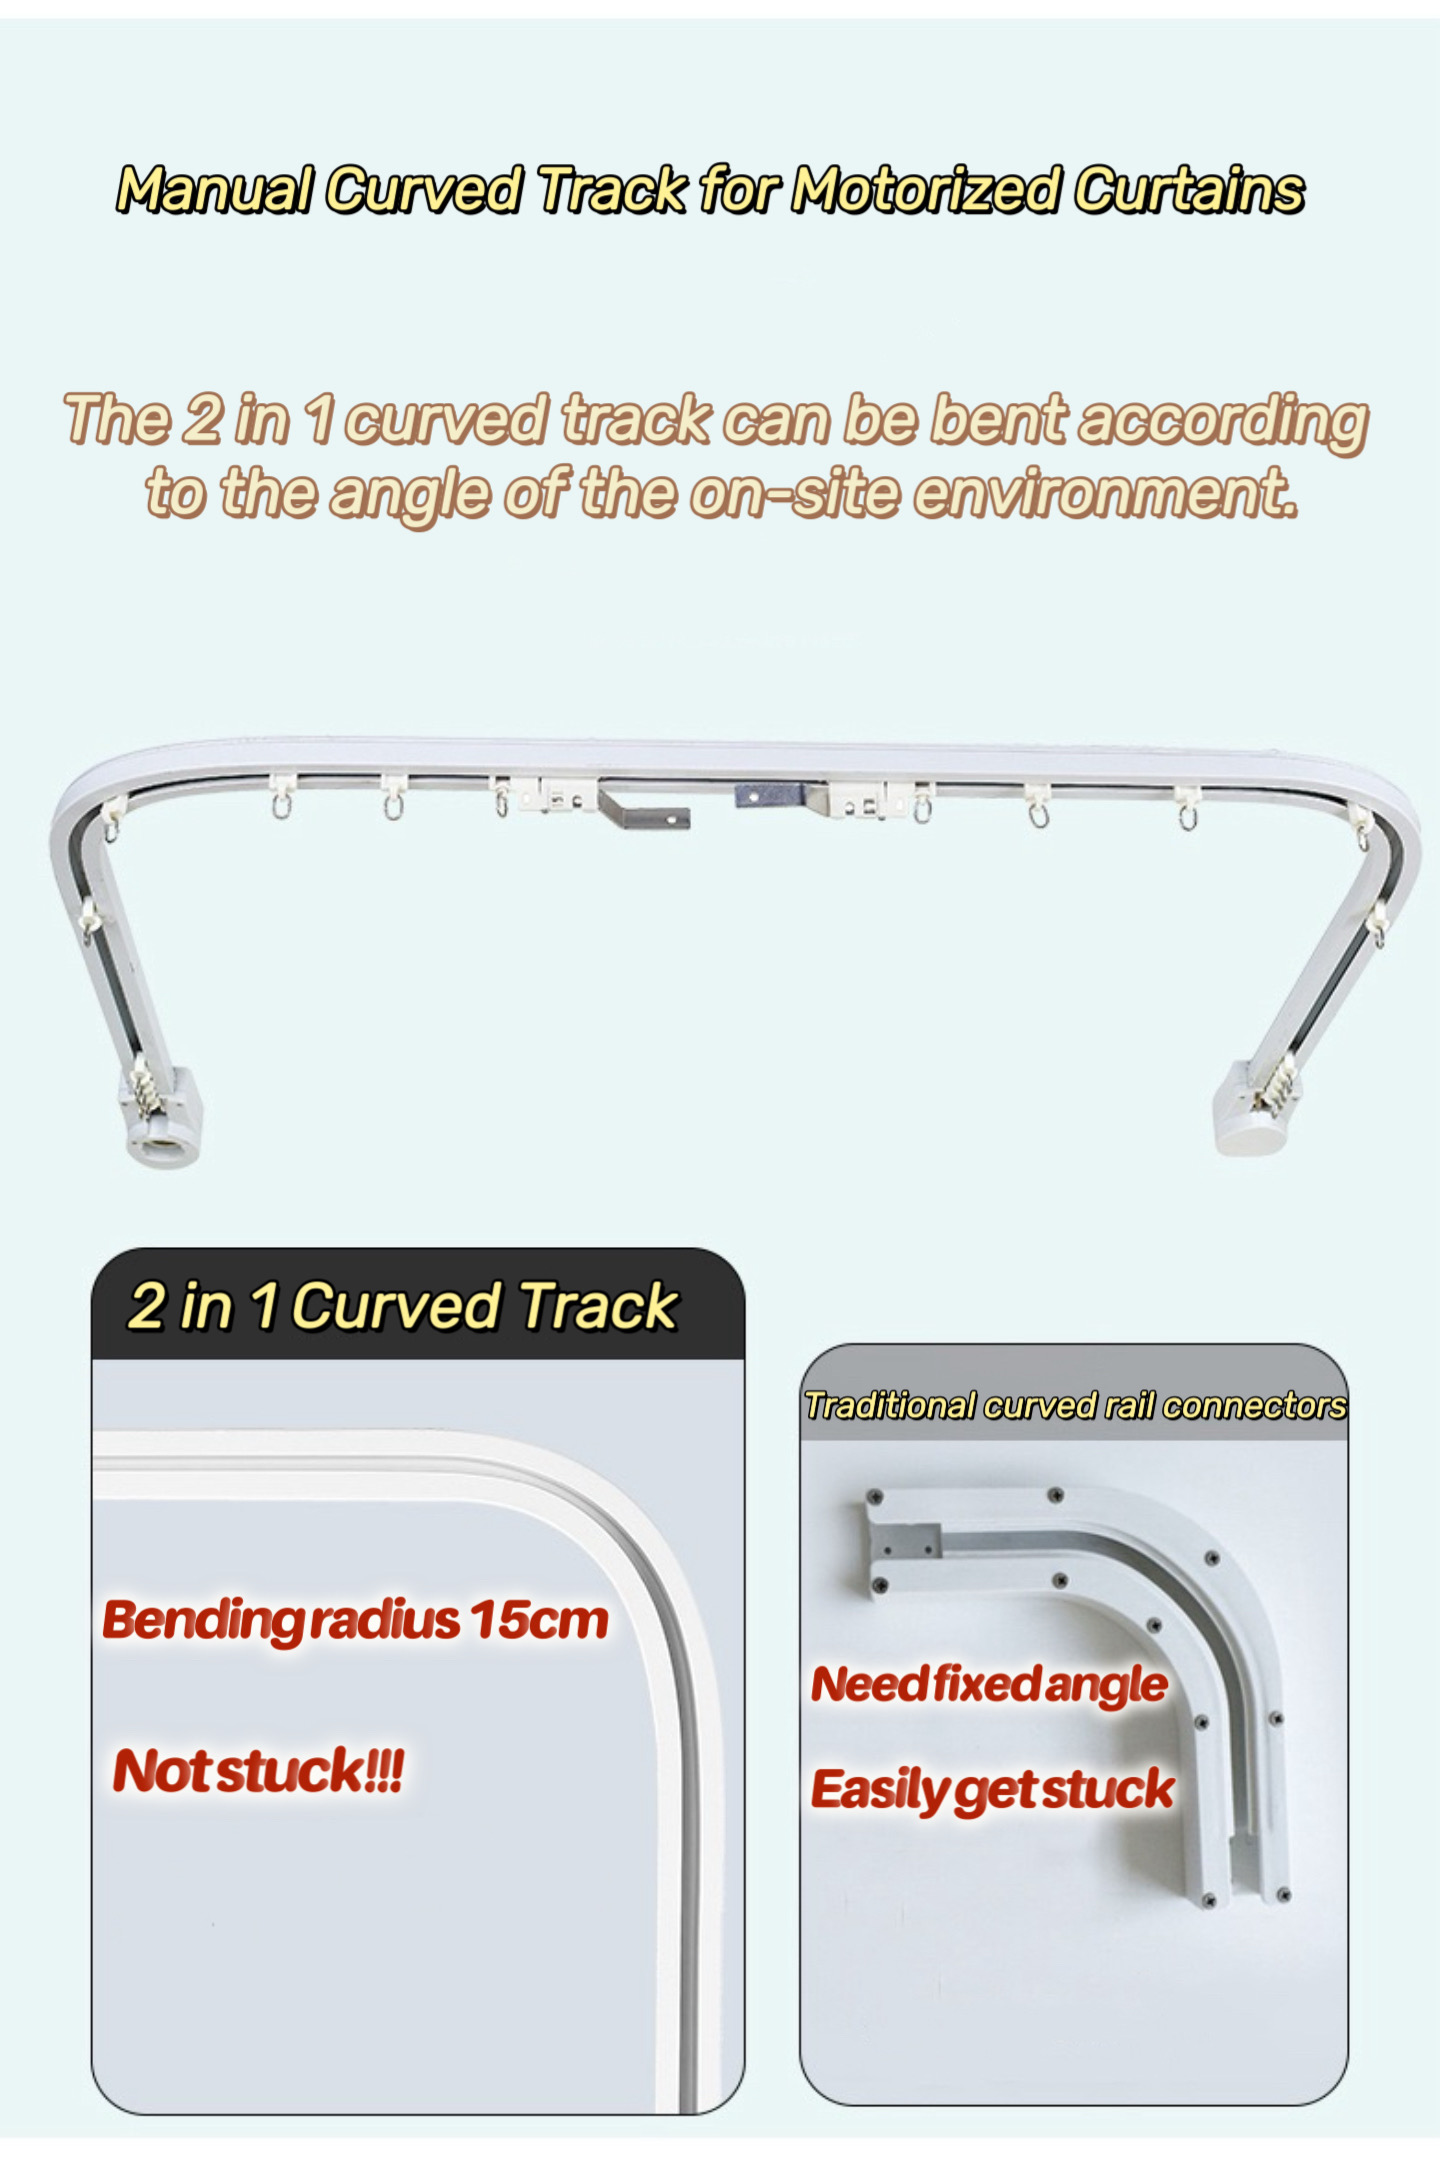 2 in 1 manual curved track VS traditional curved rail joints 